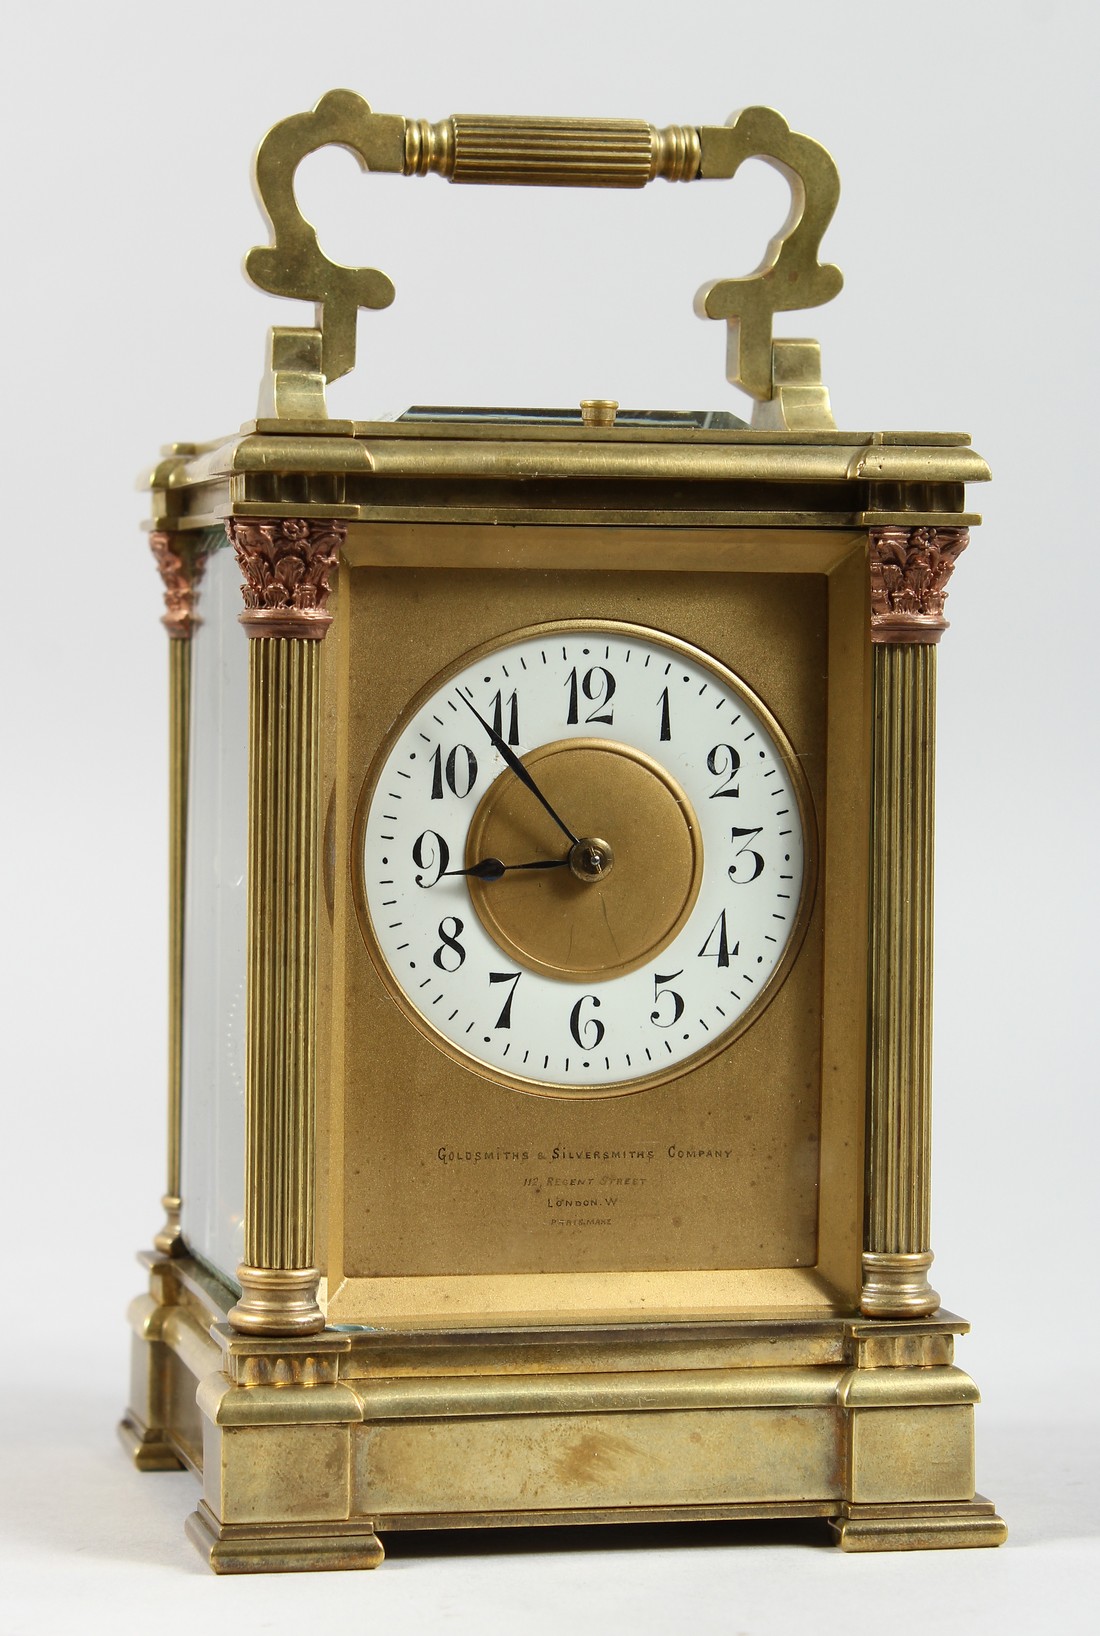 A GOOD GOLDSMITHS & SILVERSMITHS BRASS CARRIAGE CLOCK with repeat action and column supports. 6ins